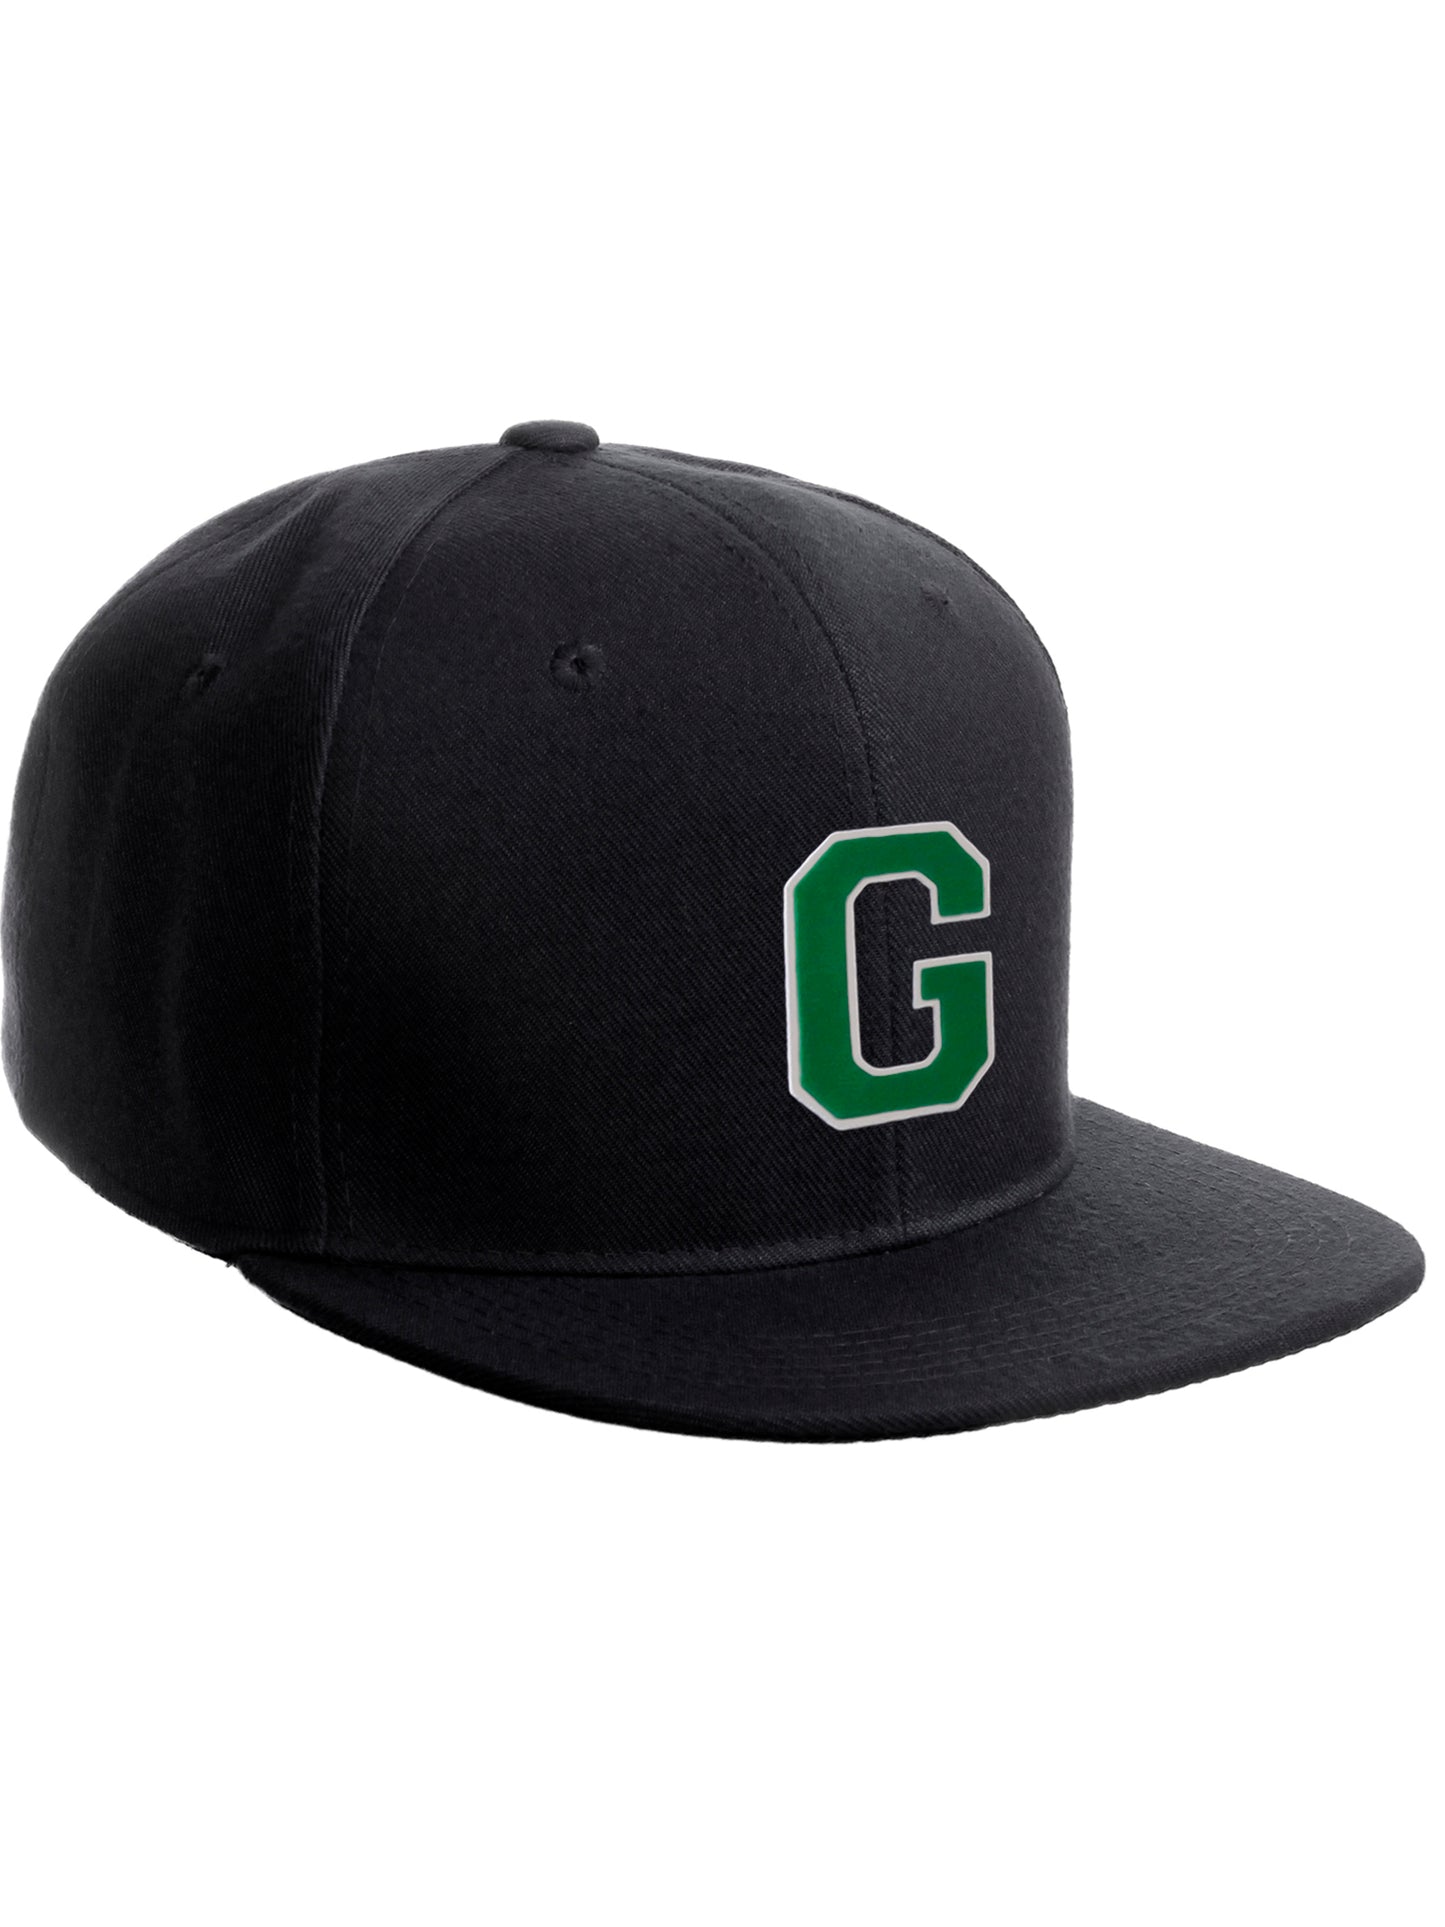 Classic Snapback Hat Custom A to Z Initial Raised Letters, Black Cap White Green